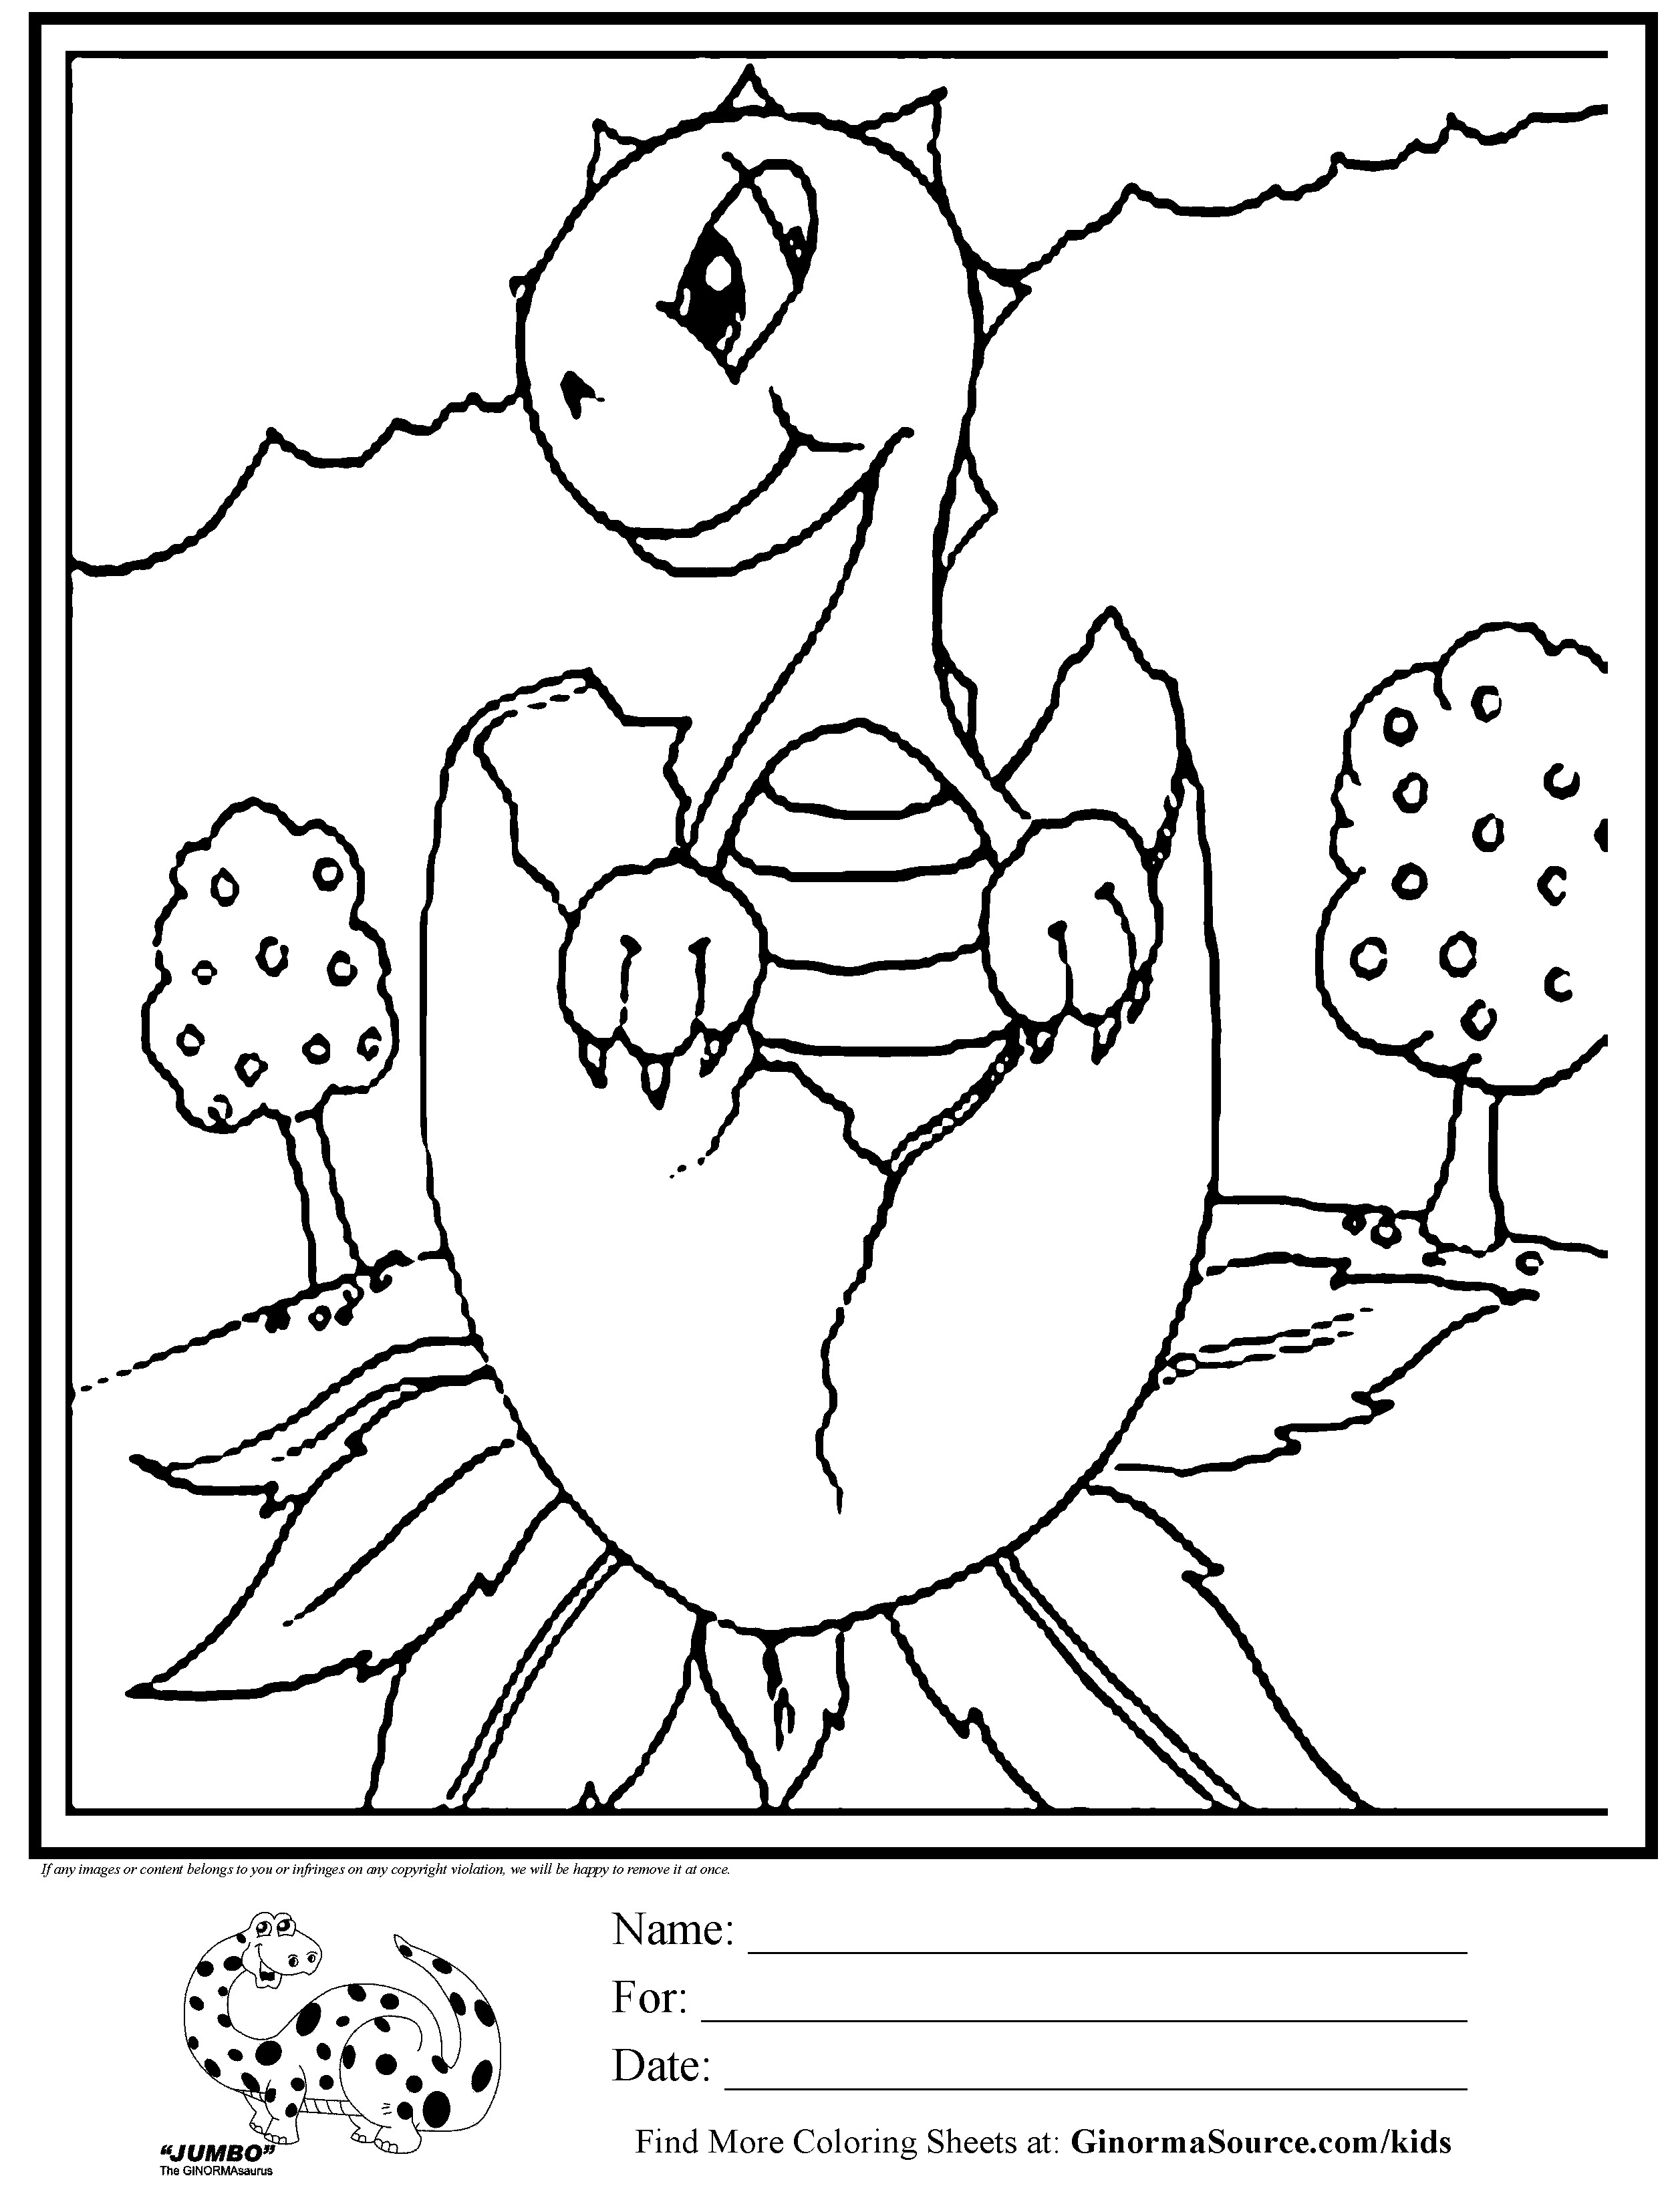 Printable Cute Coloring Pages For Boys
 coloring pages for boys baby dinosaur